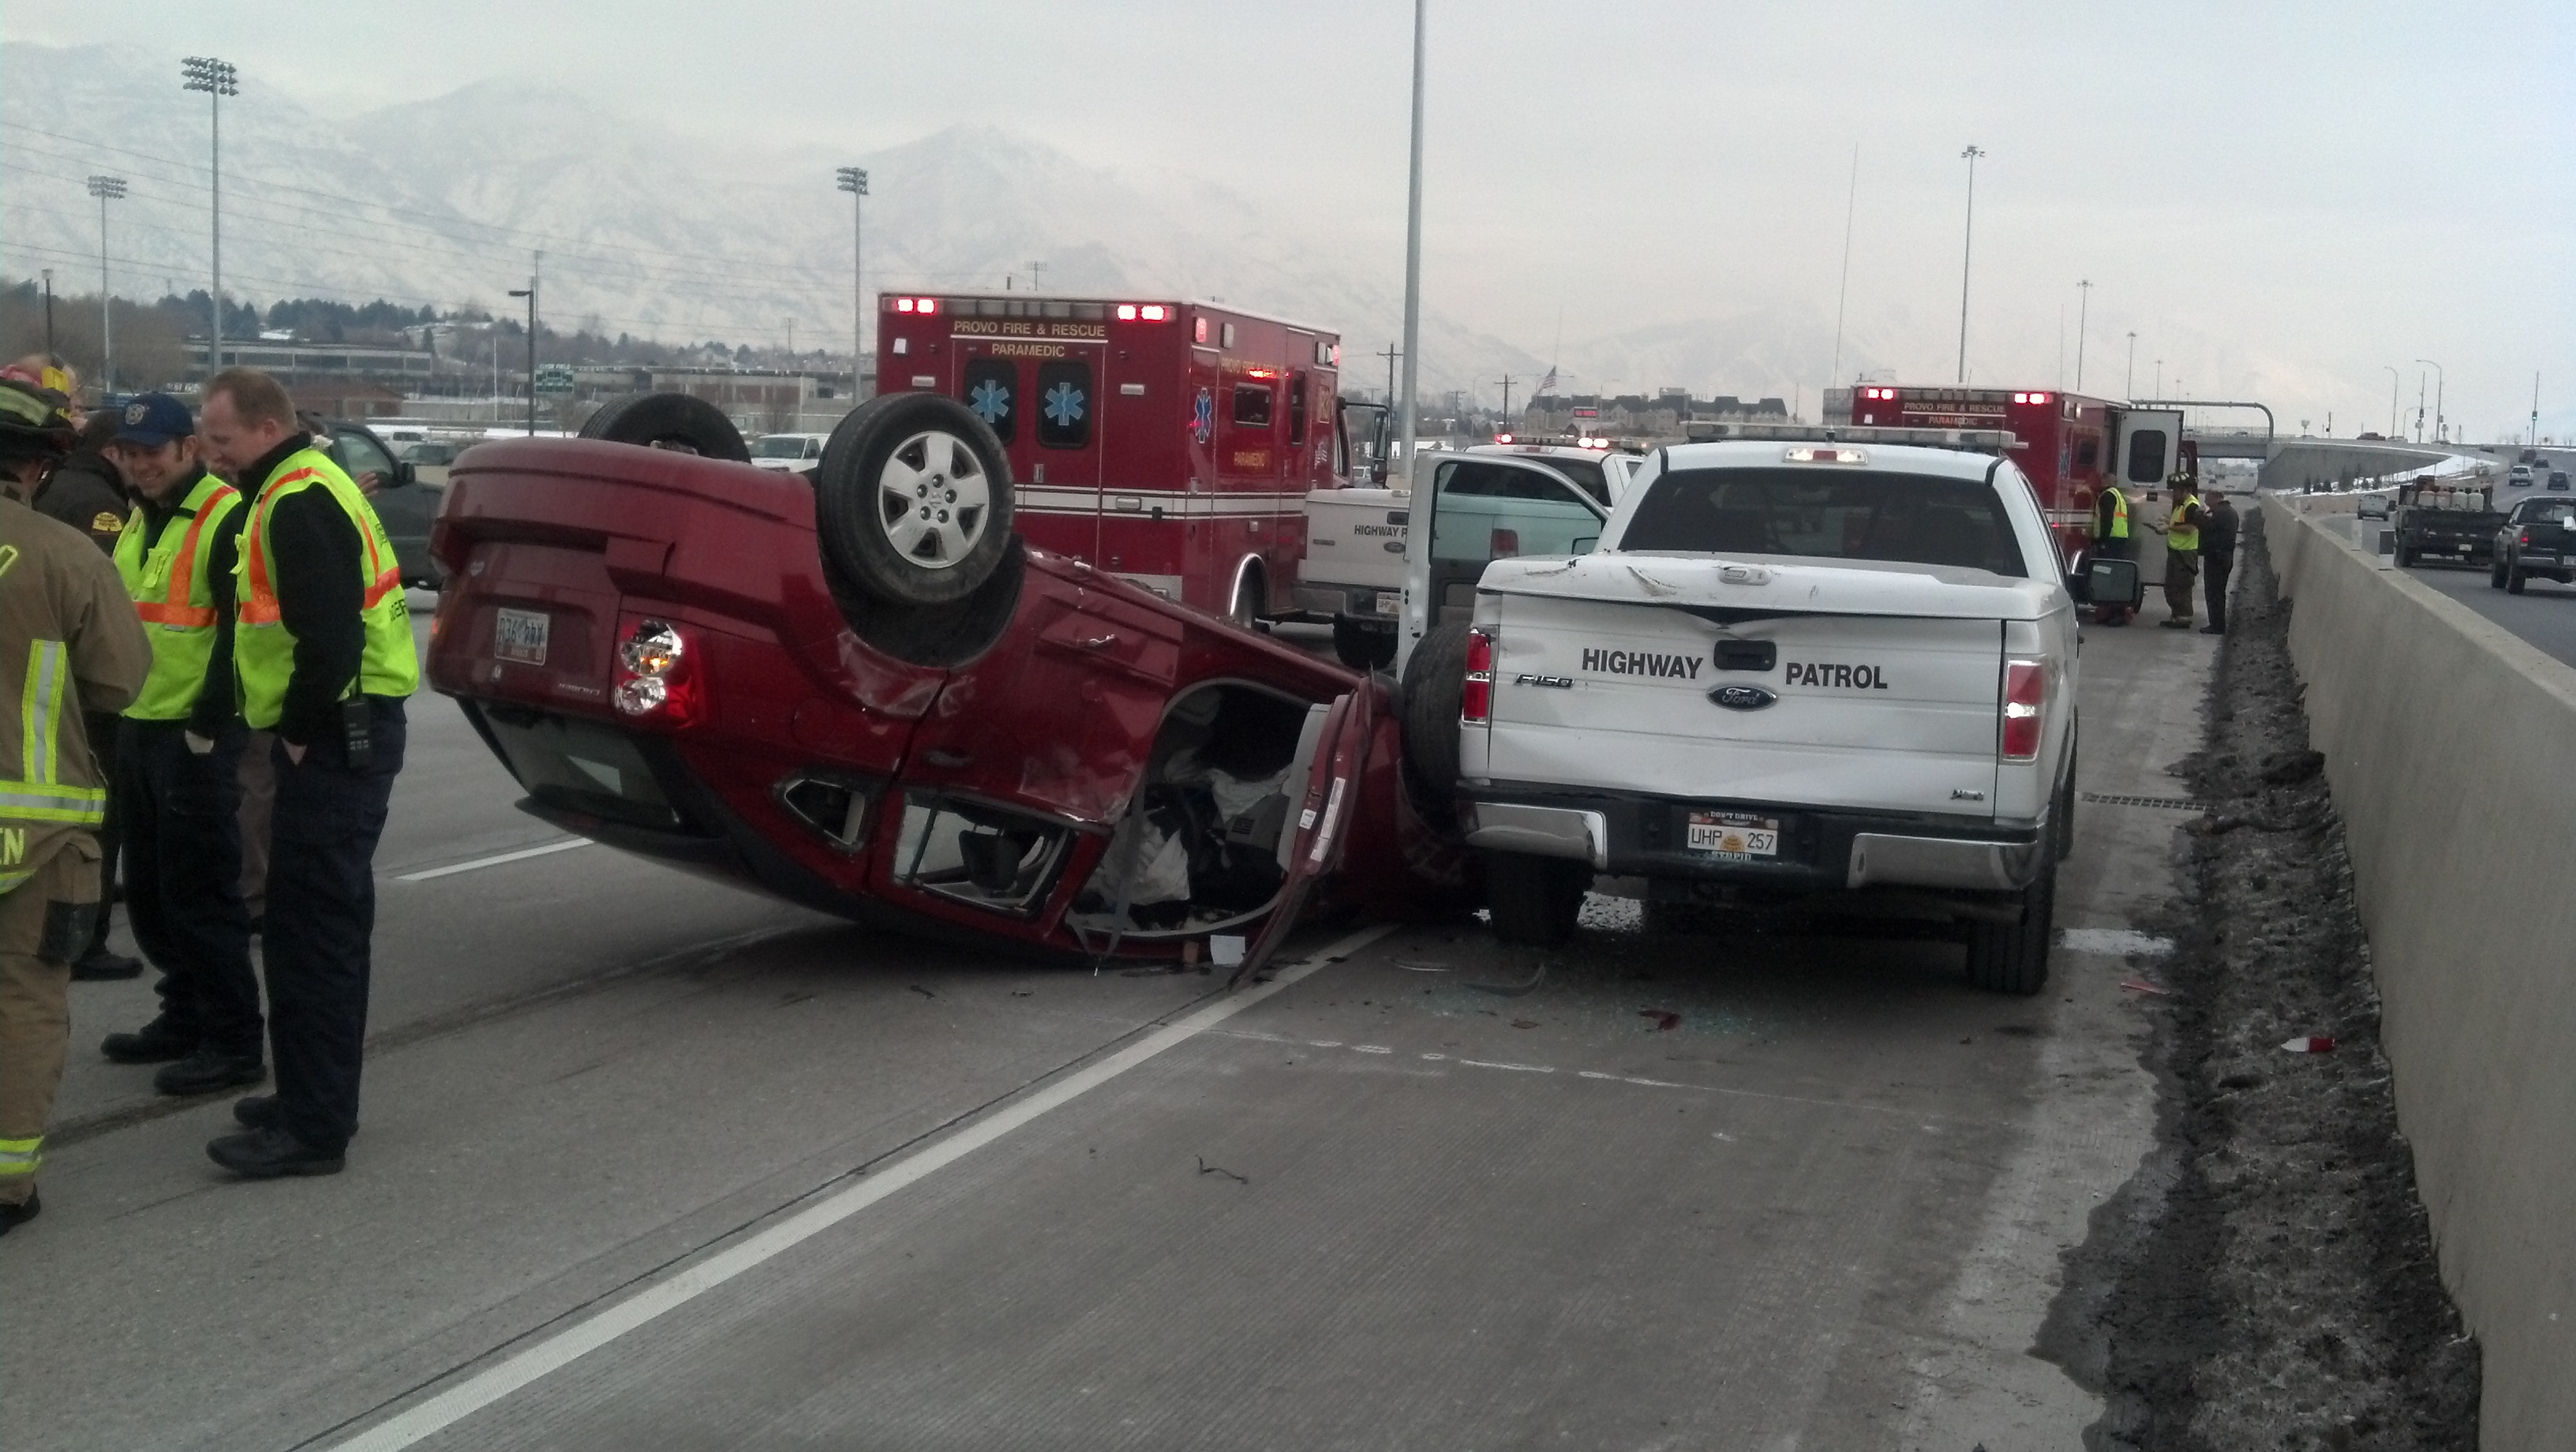 The shoulder of the road is dangerous and can be deadly. Photo shows a car that flipped upside down after striking a UHP vehicle on the shoulder.